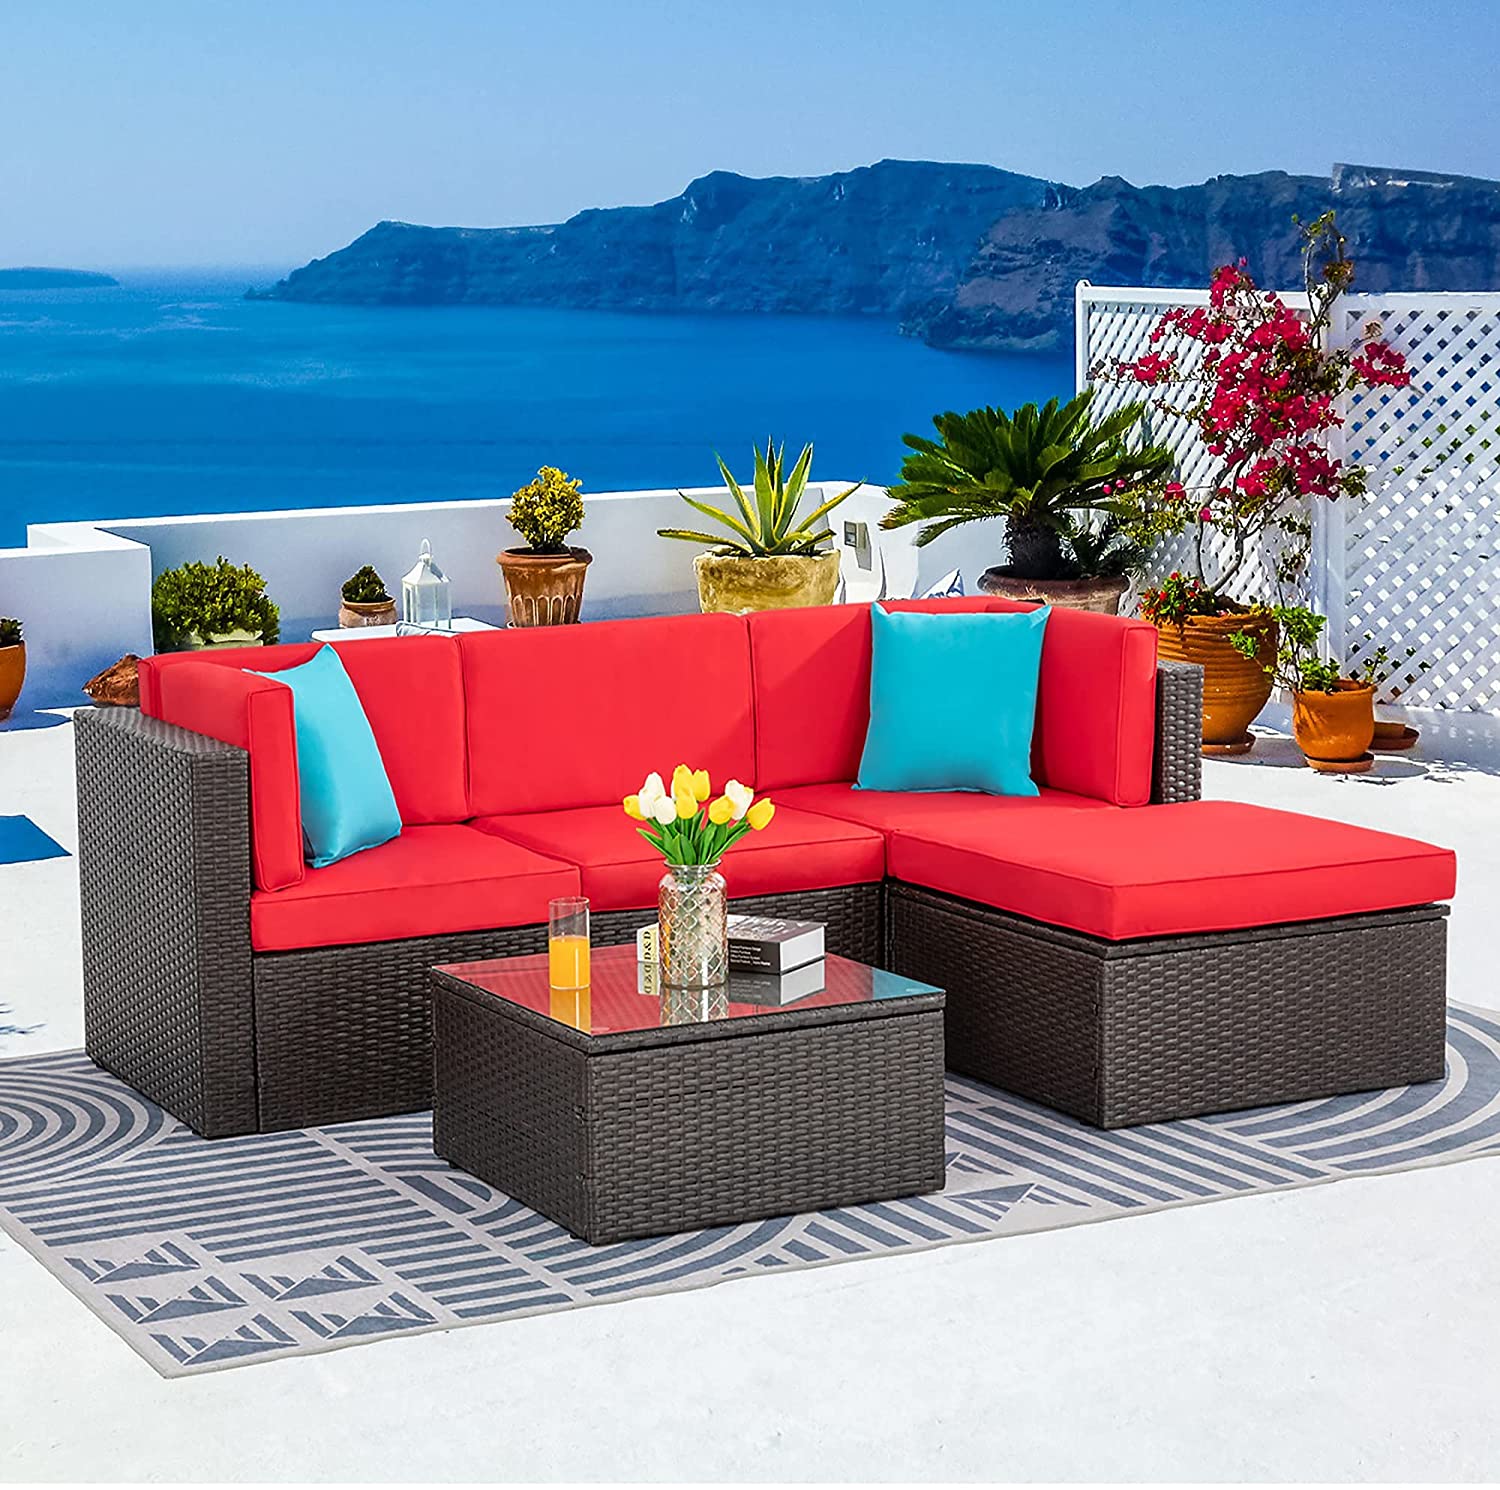 Sobaniilo 5 Pieces Patio Sectional Sofa Sets, All-Weather Outdoor Rattan Conversation Set for Garden Patio Sofa with Ottoman and Glass Table, Red - image 1 of 7